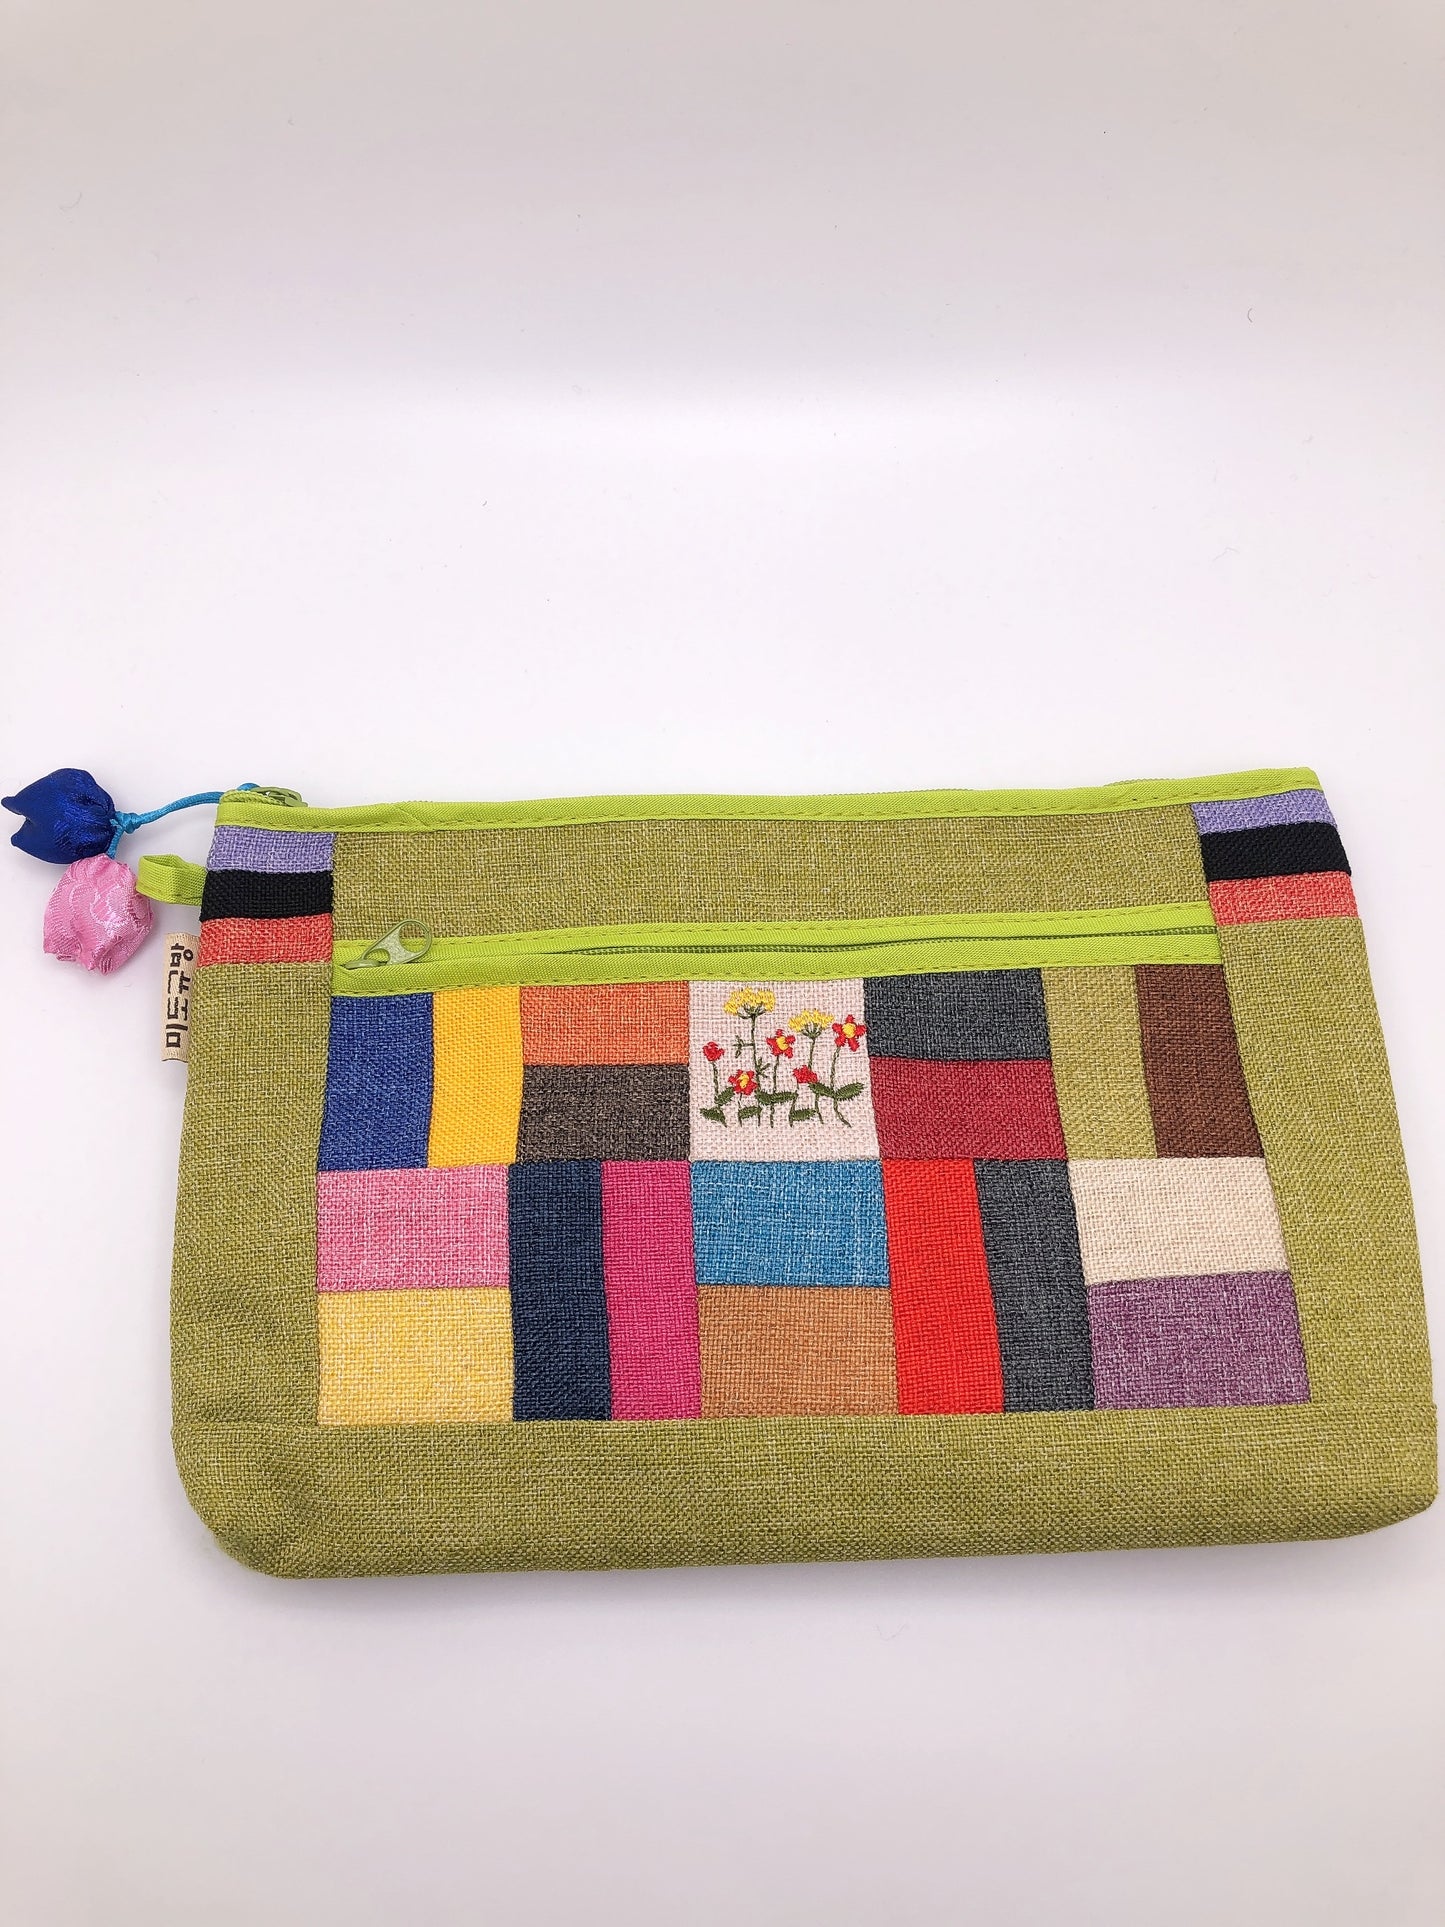 Korea traditional pouch